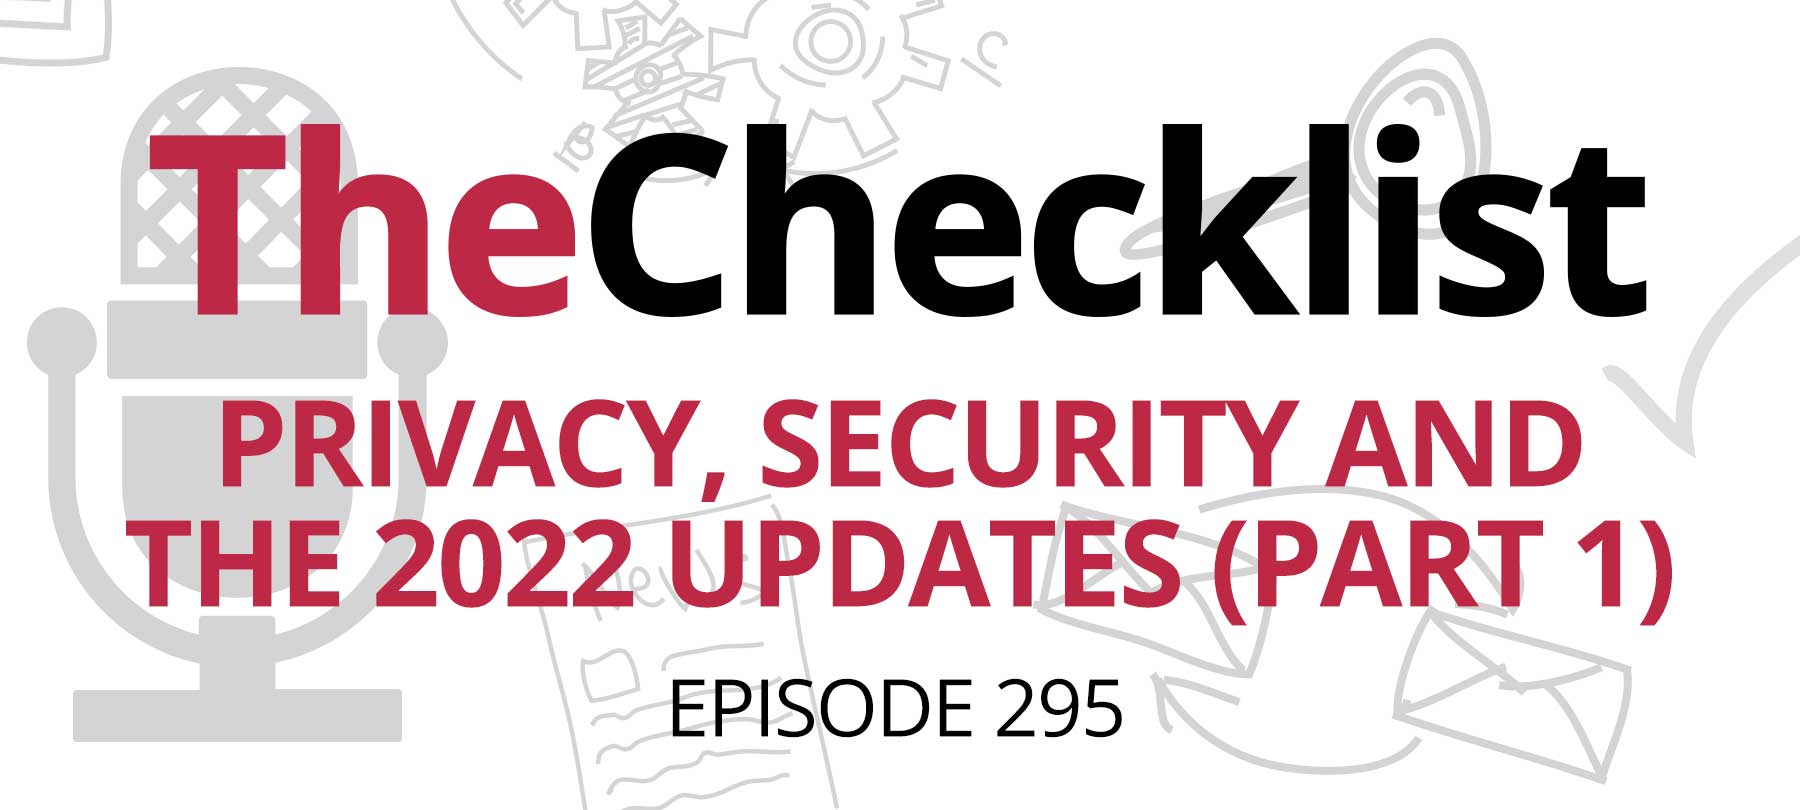 Checklist 295: Privacy, Security and the 2022 Updates (Part 1)